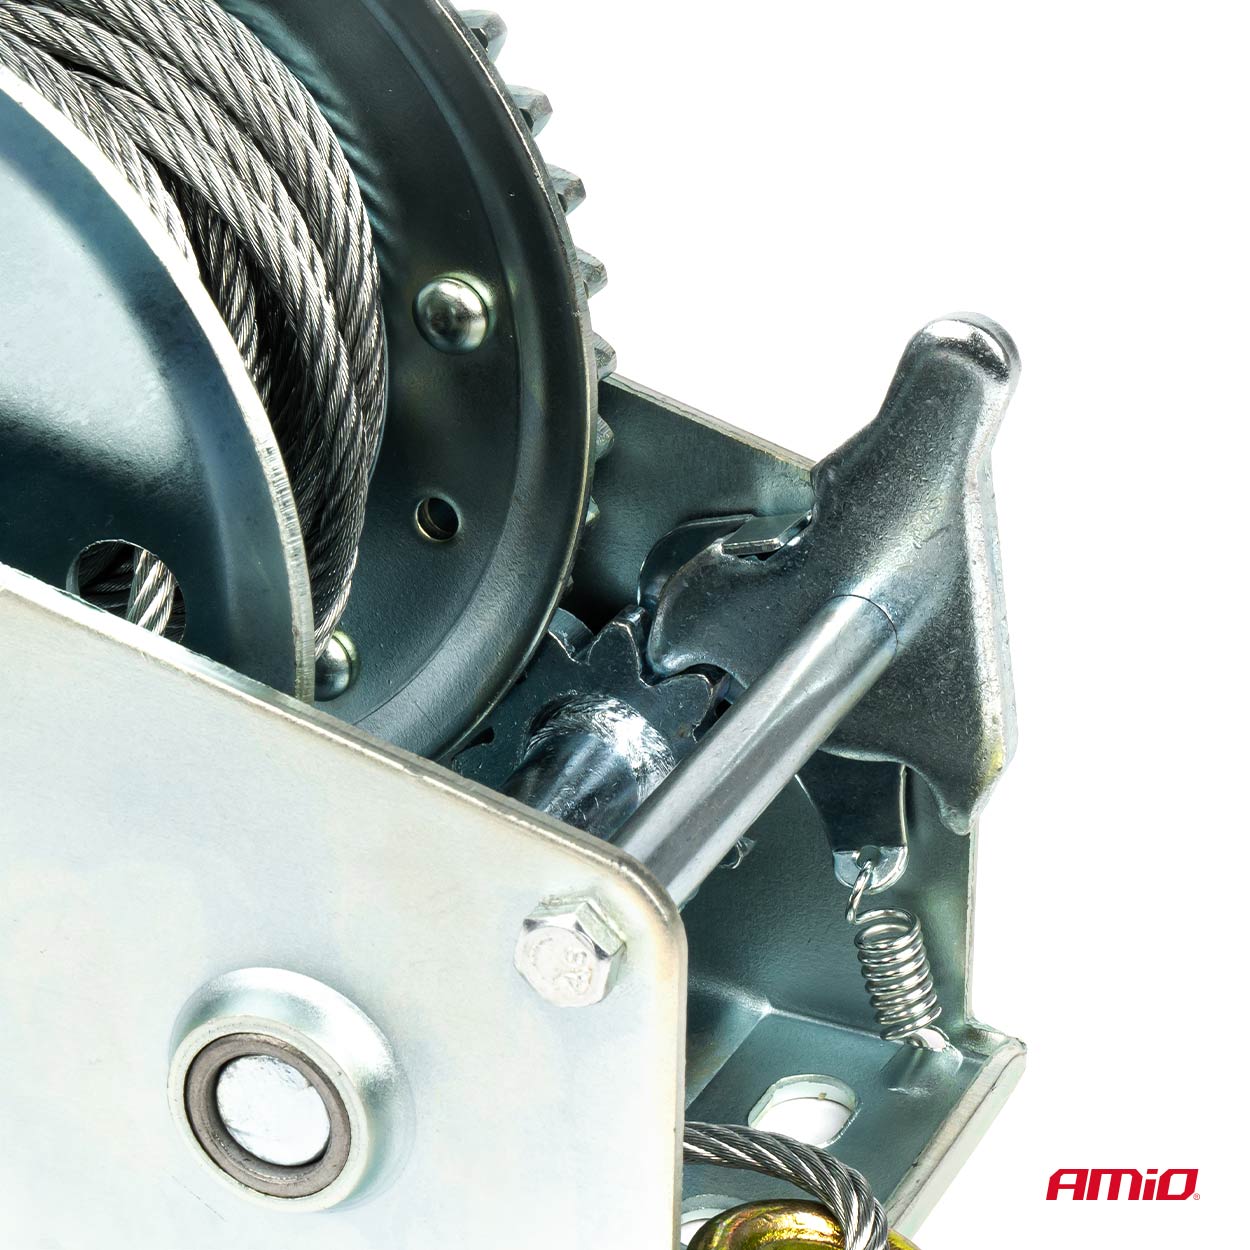 Amio Handwinch 450kg with 5m cable thumb